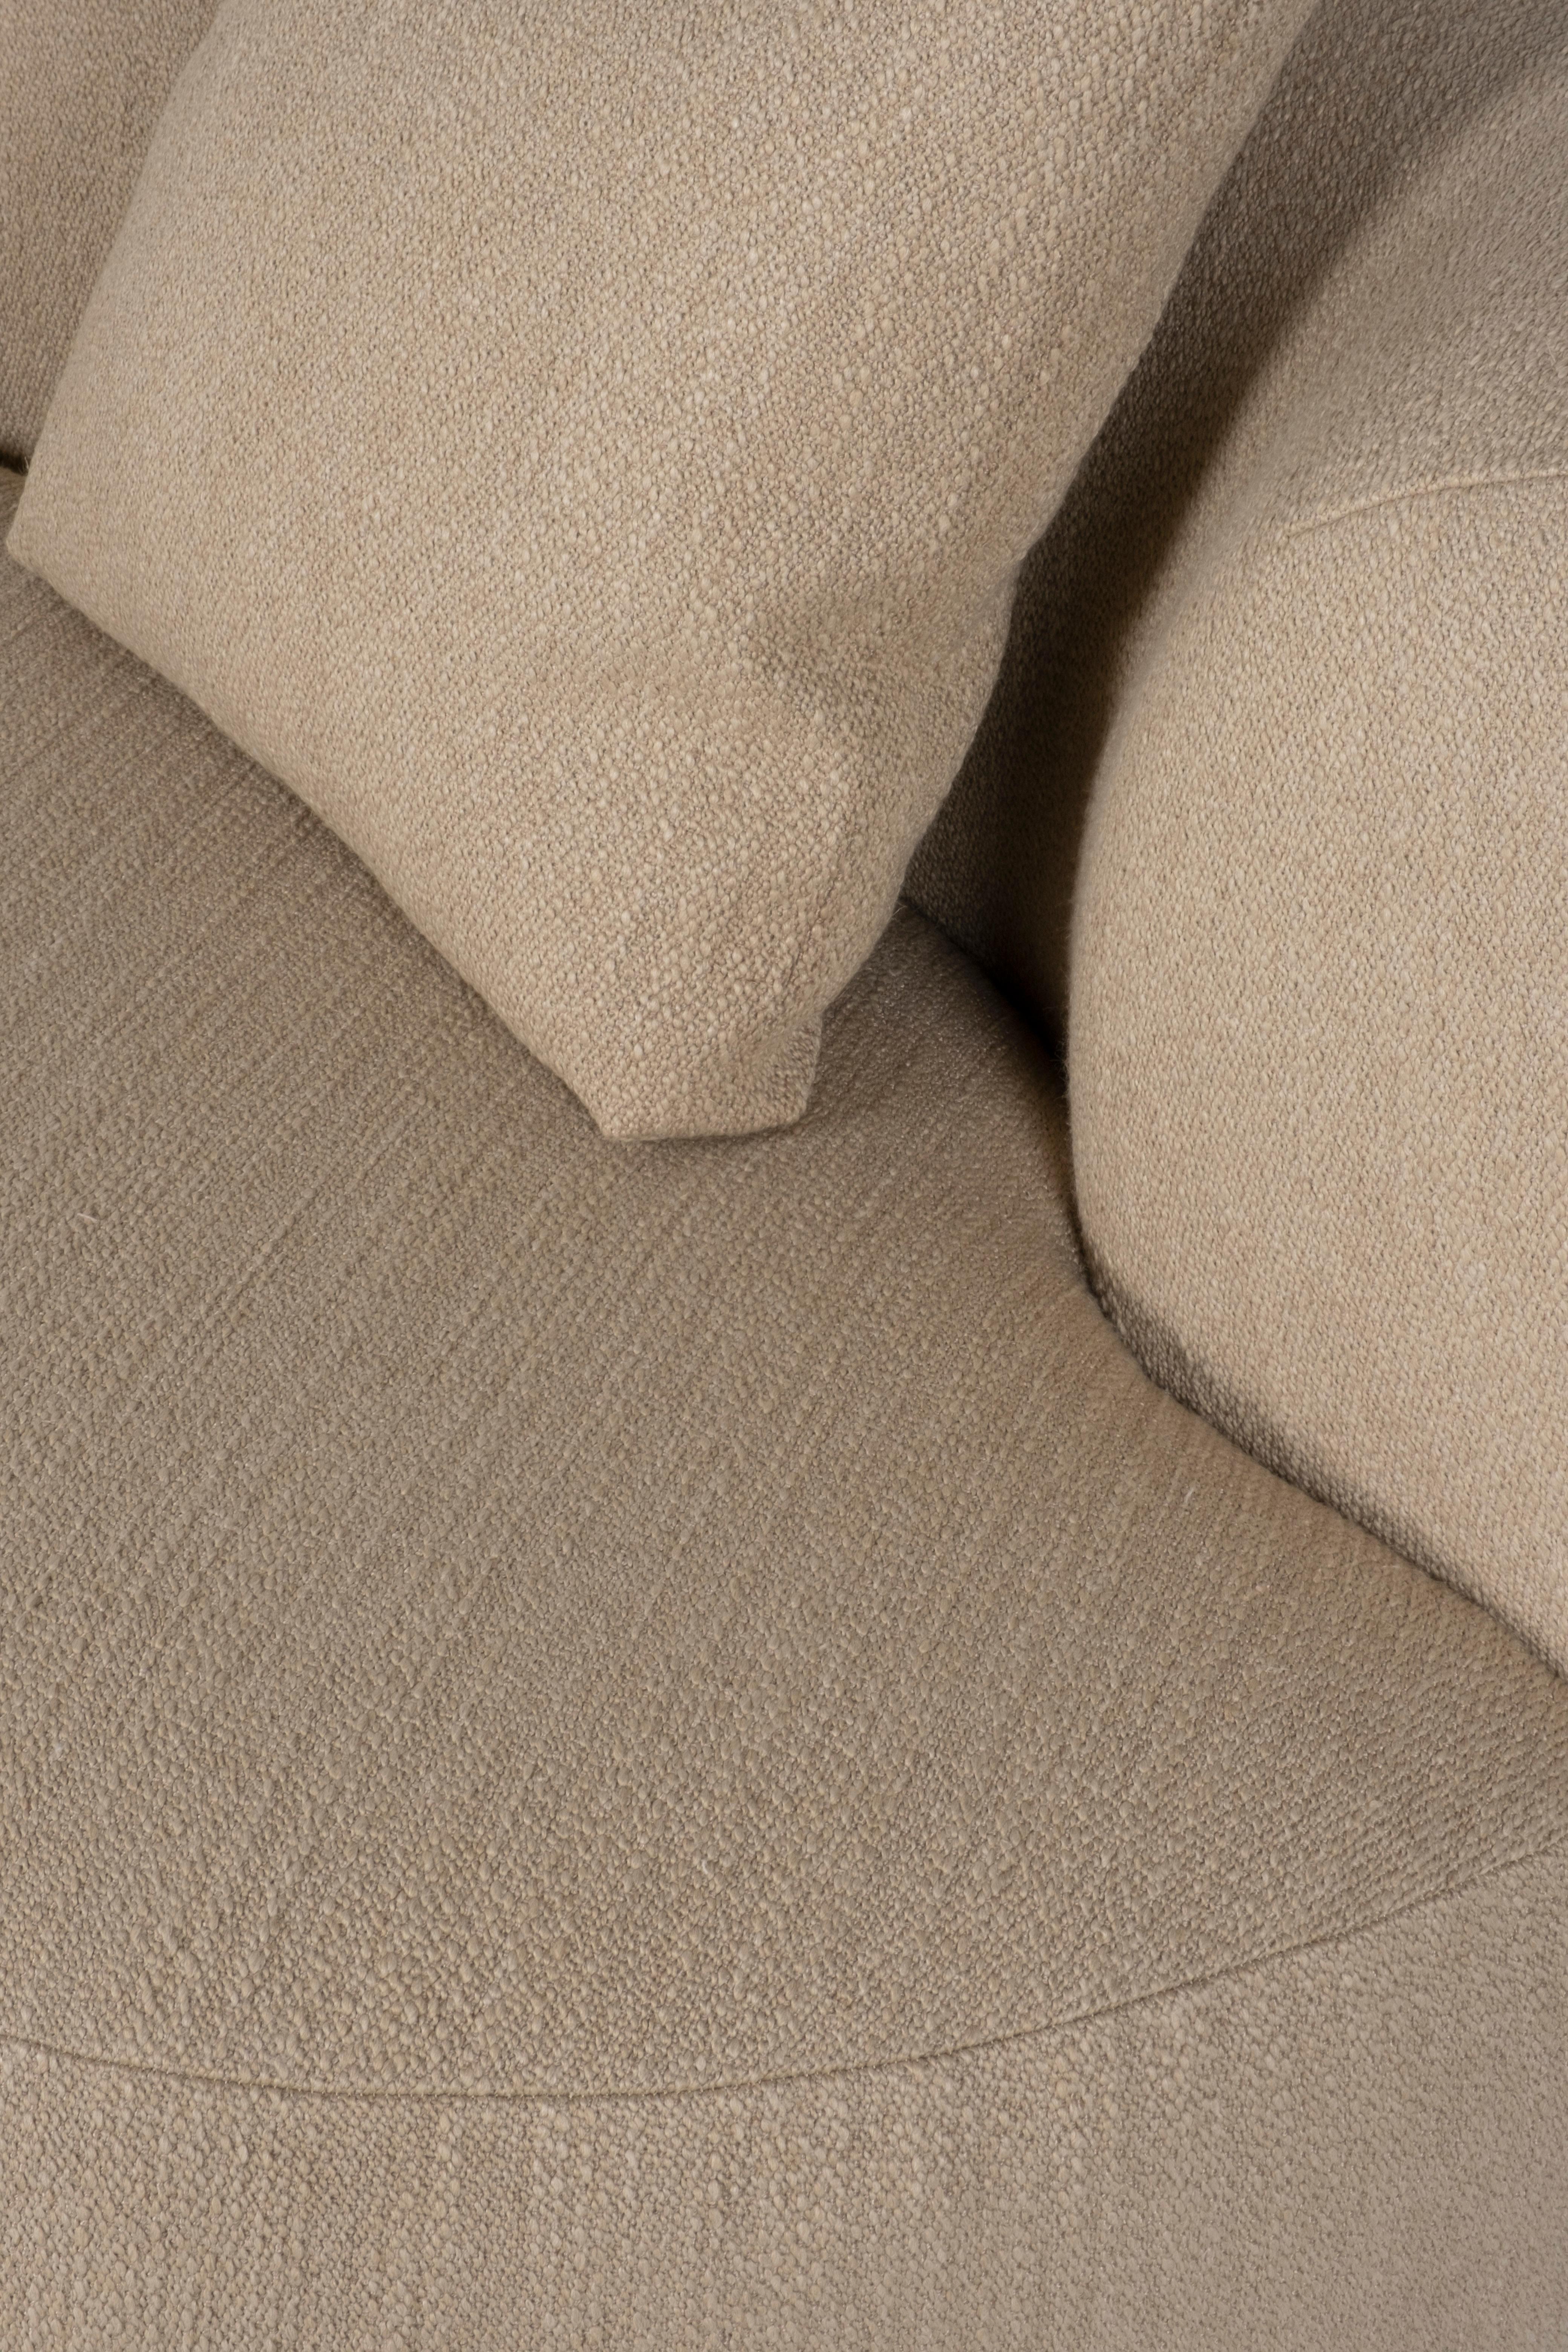 Hand-Crafted Modern Twins Curved Sofa, Beige Wool Linen, Handmade in Portugal by Greenapple For Sale